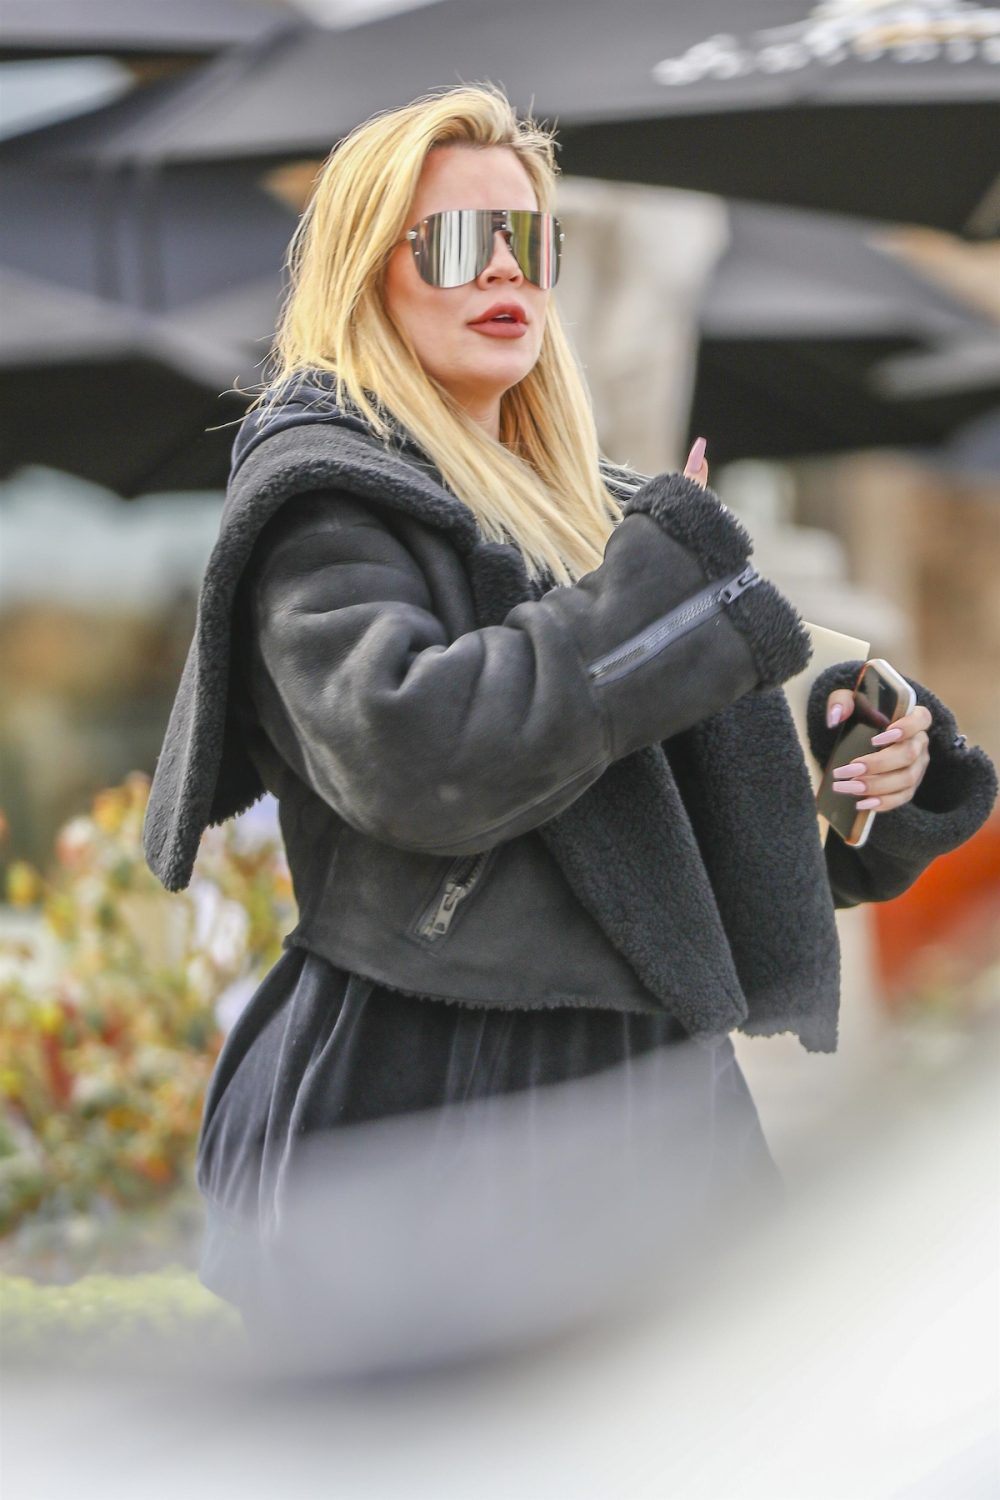 Khloe Kardashian hides her baby bump while out at Polacheck's Jewelers in Calabasas on December 23.